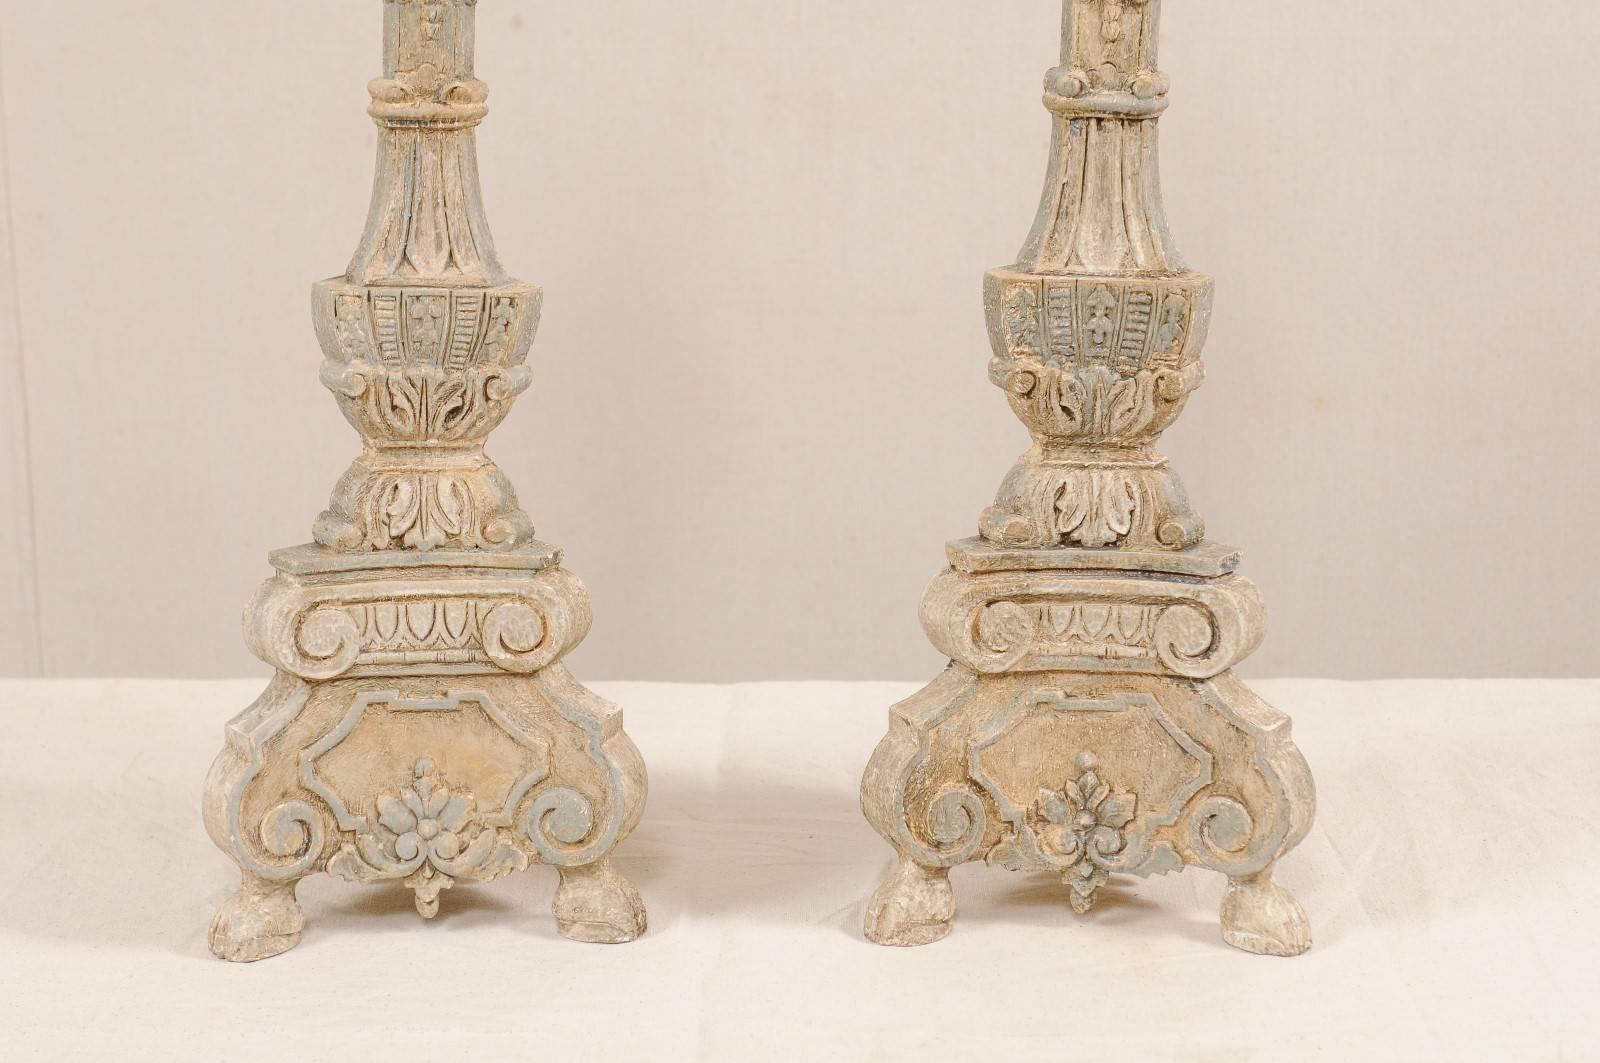 Contemporary Pair of Italian Style Hand-Carved and Painted Tall Candlestick Table Lamps